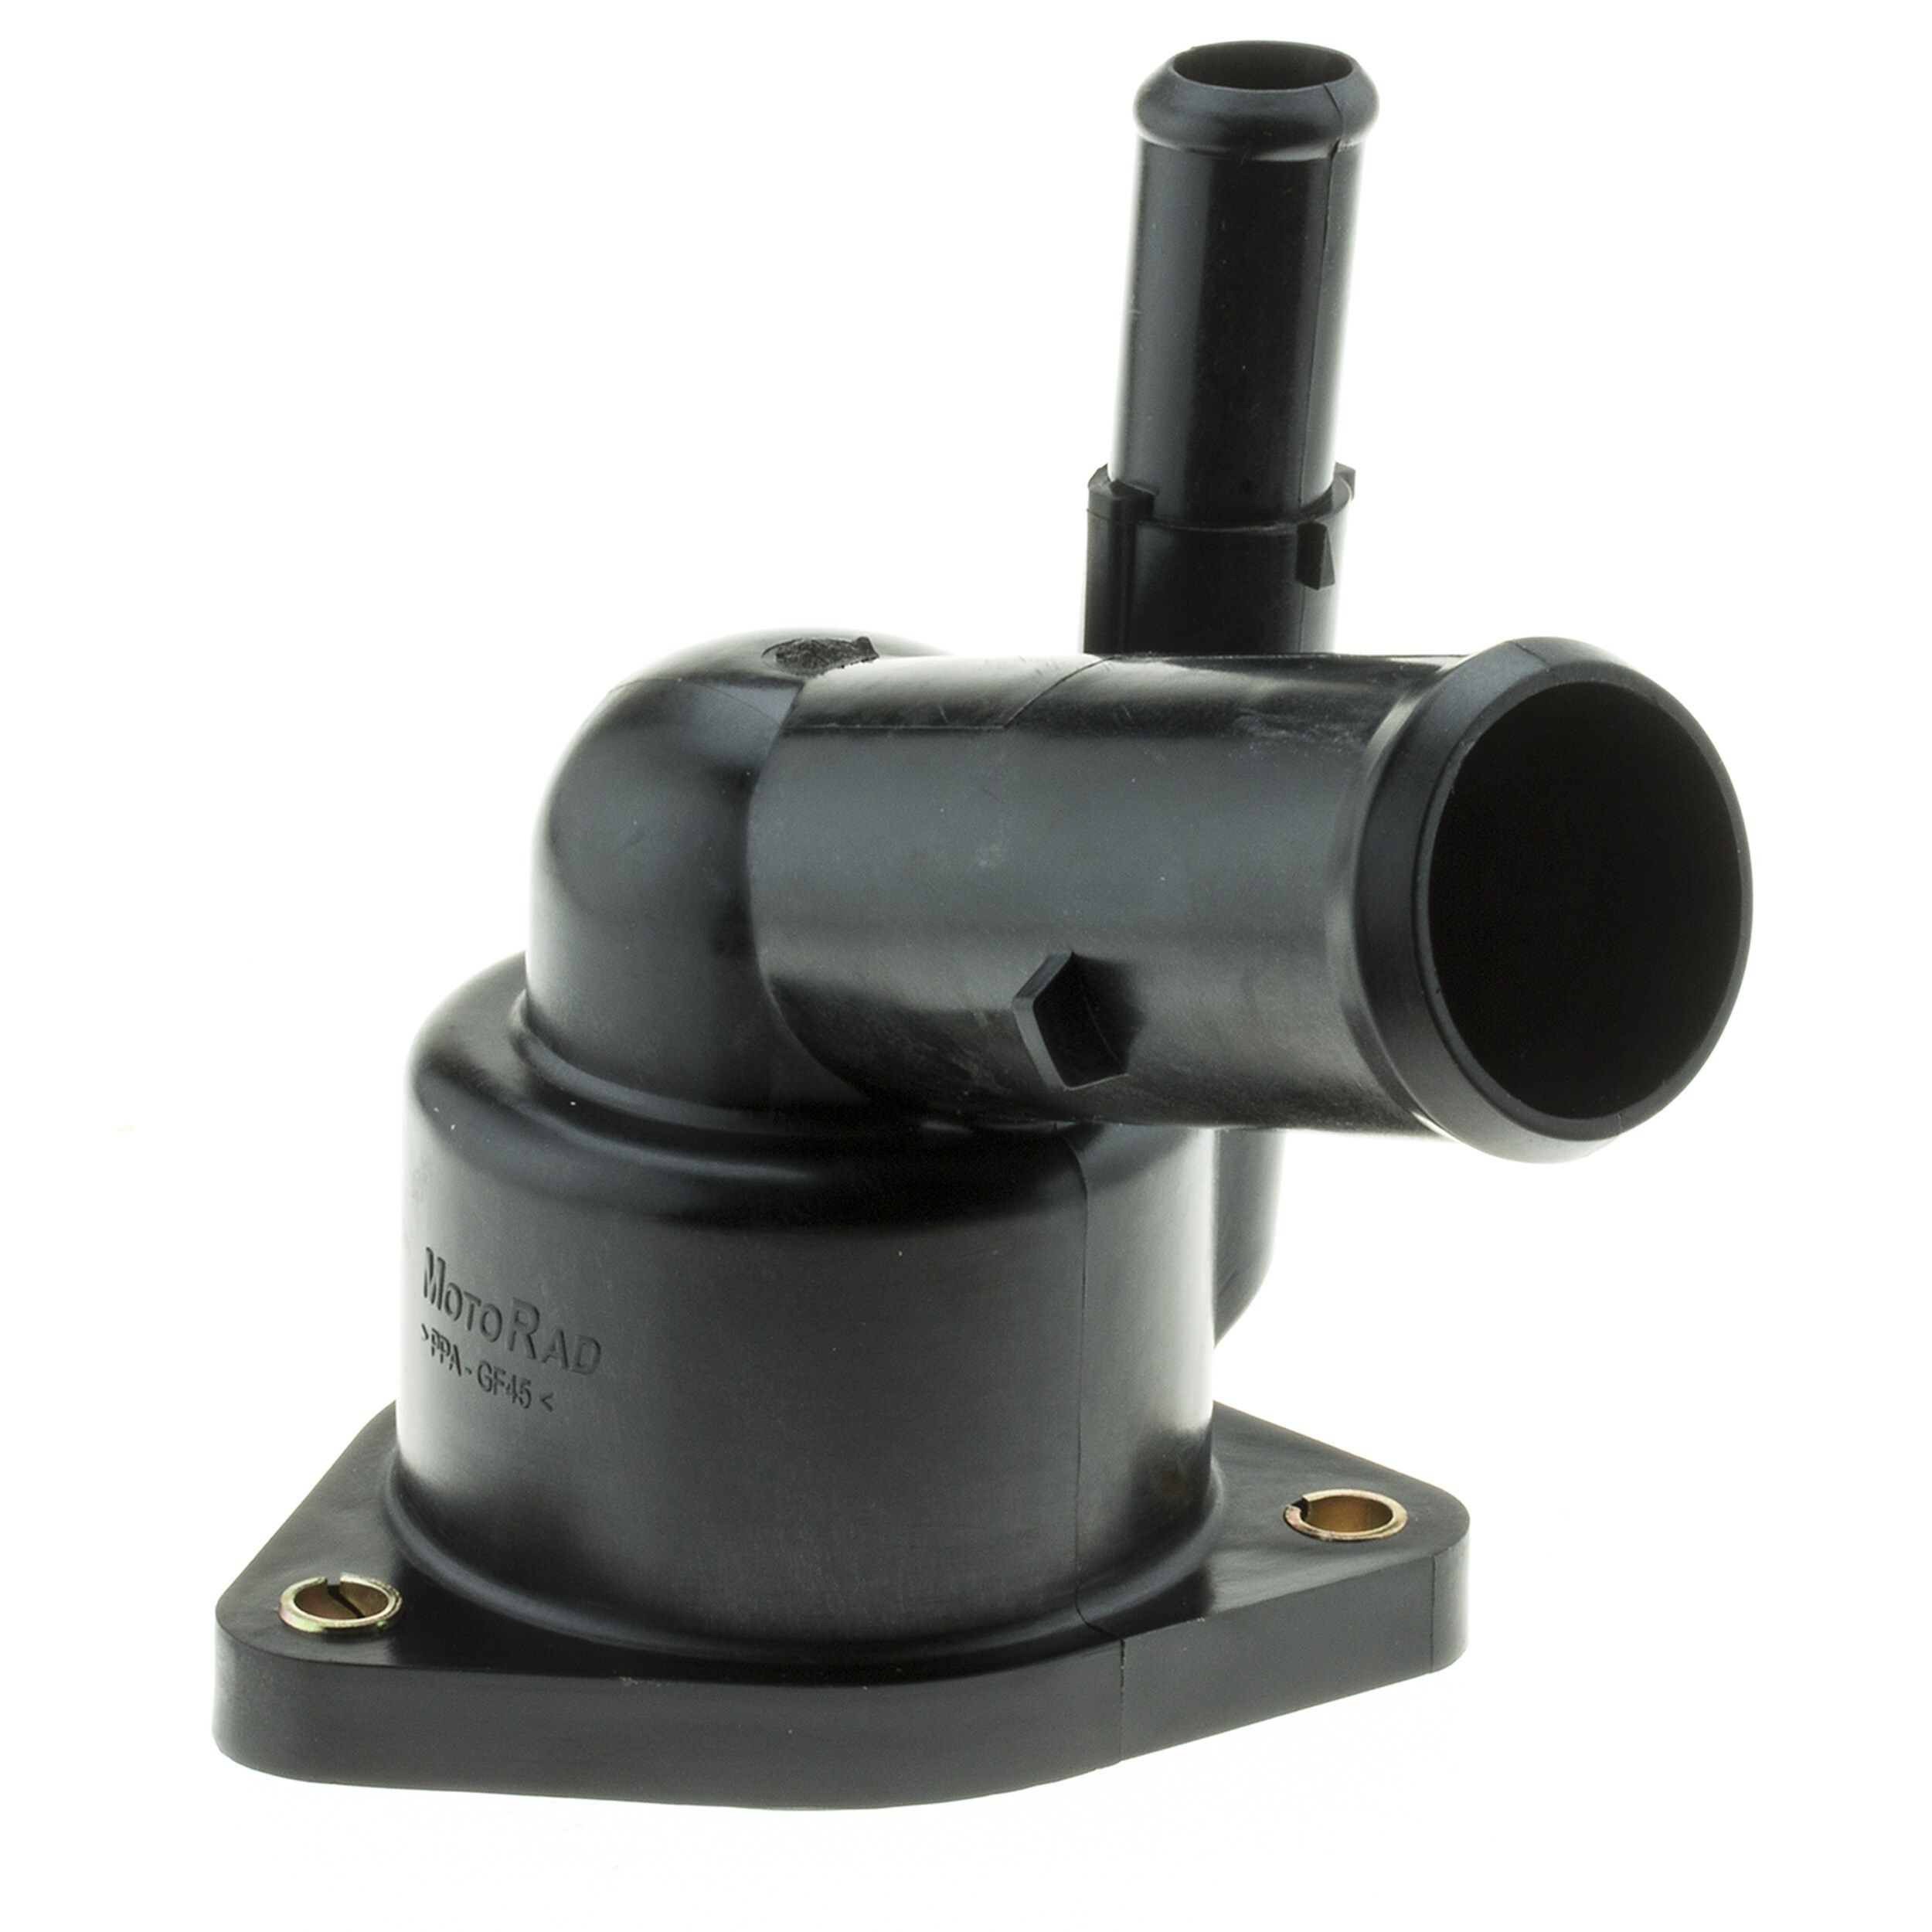 MOTORAD 700-82K Engine thermostat Opening Temperature: 82°C, with housing